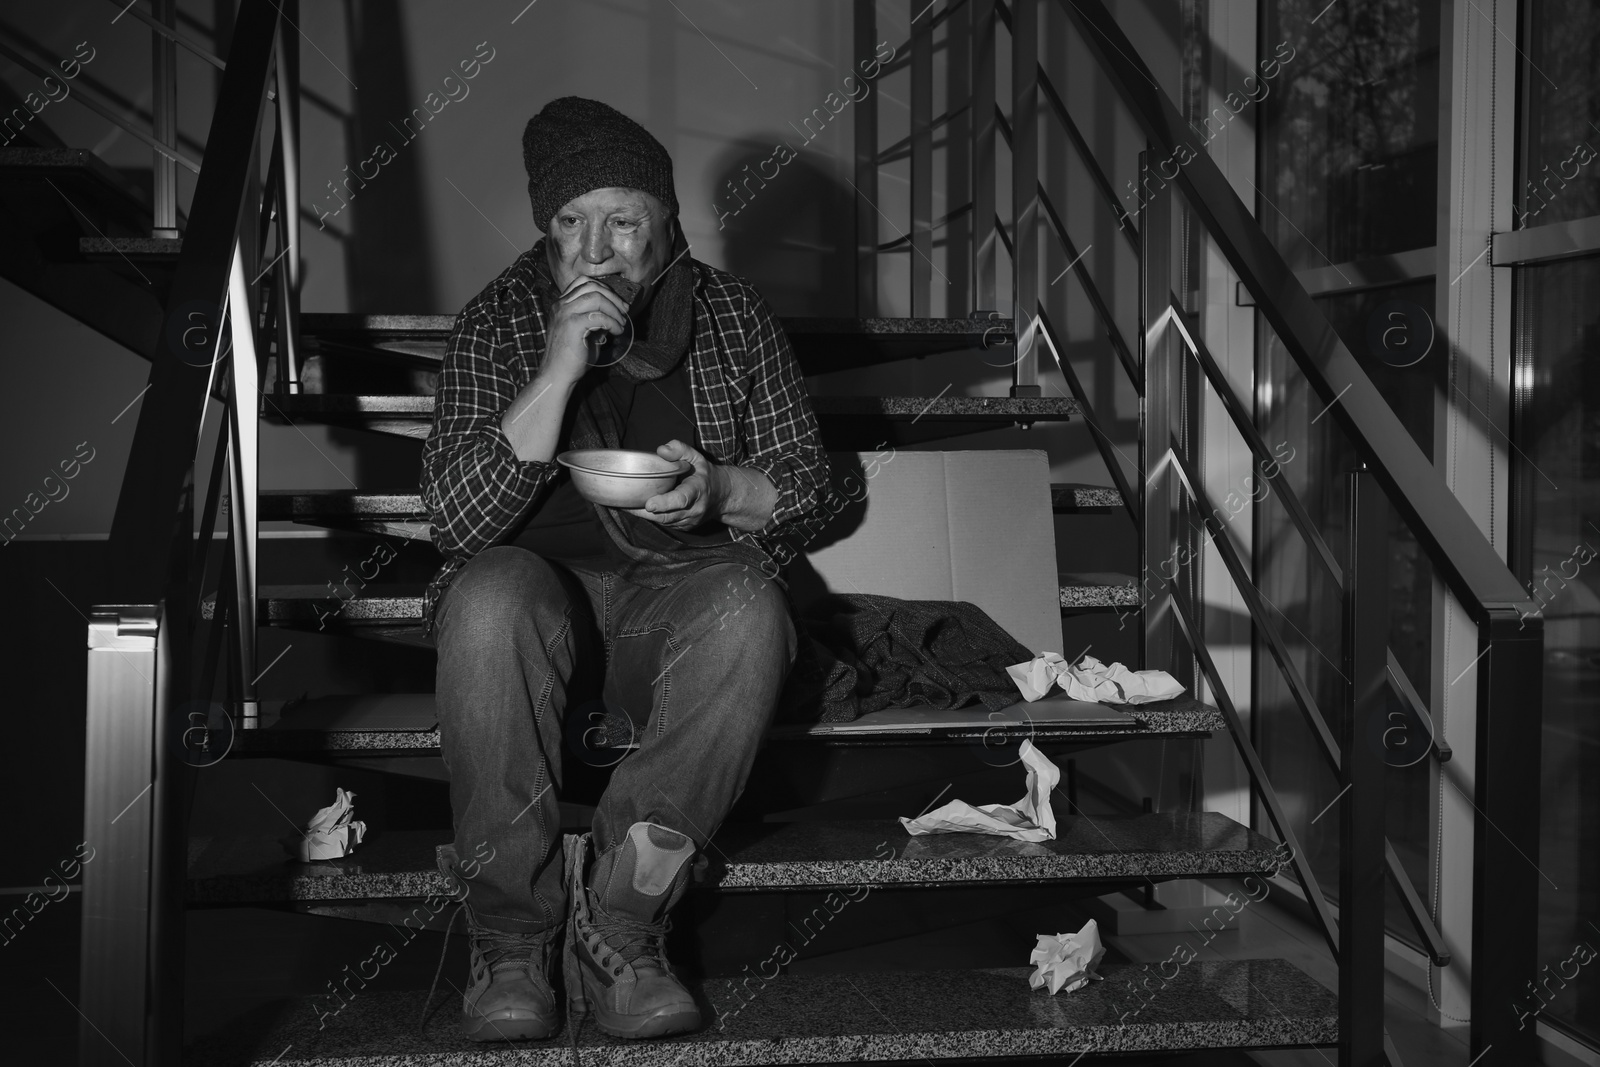 Photo of Poor senior man with bowl and bread on stairs indoors. Black and white effect